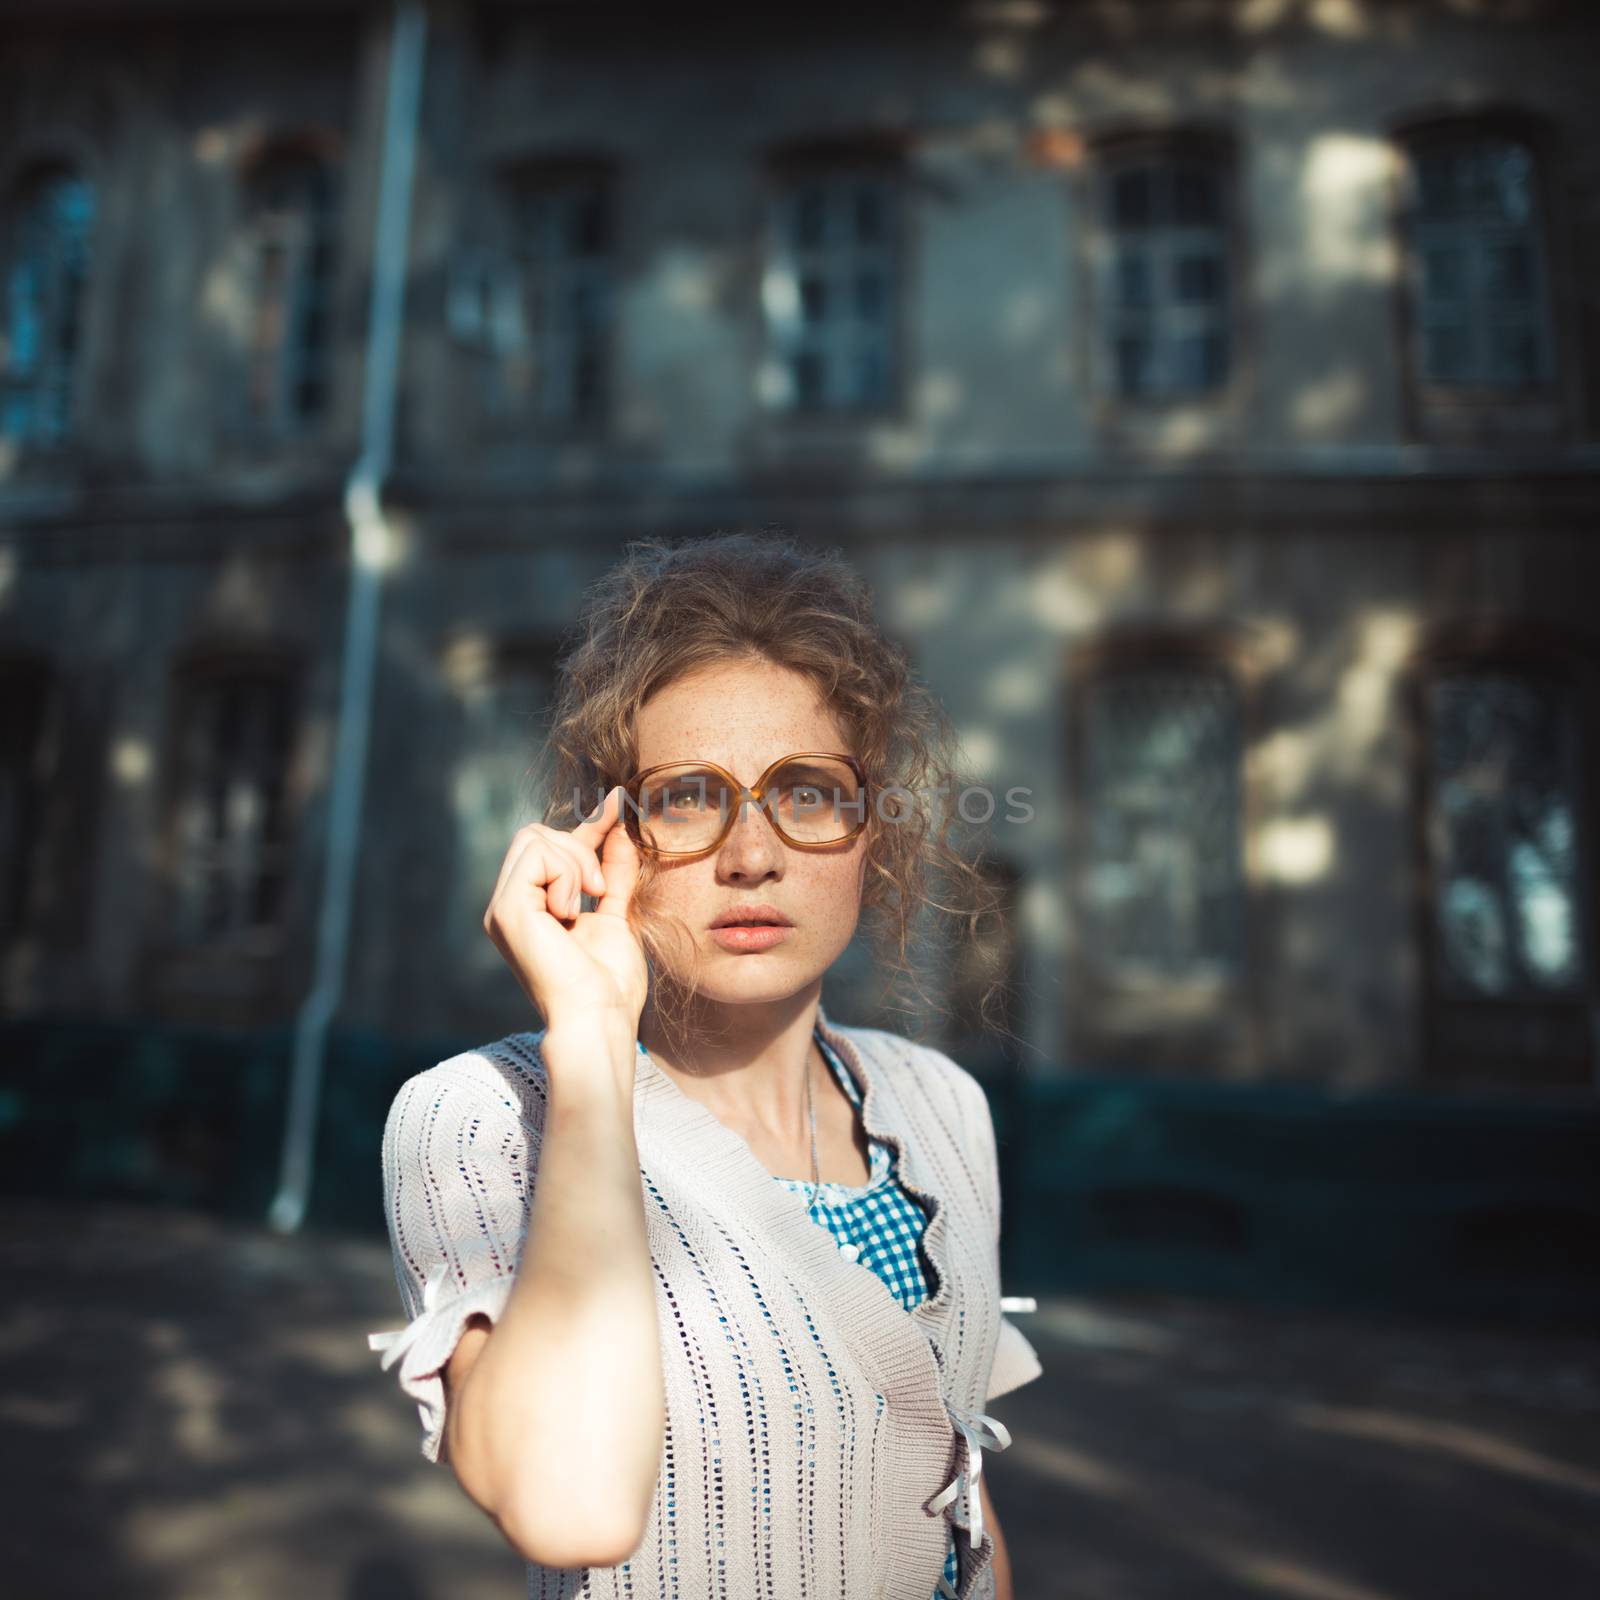 Funny girl student with glasses and a vintage dress outdoors